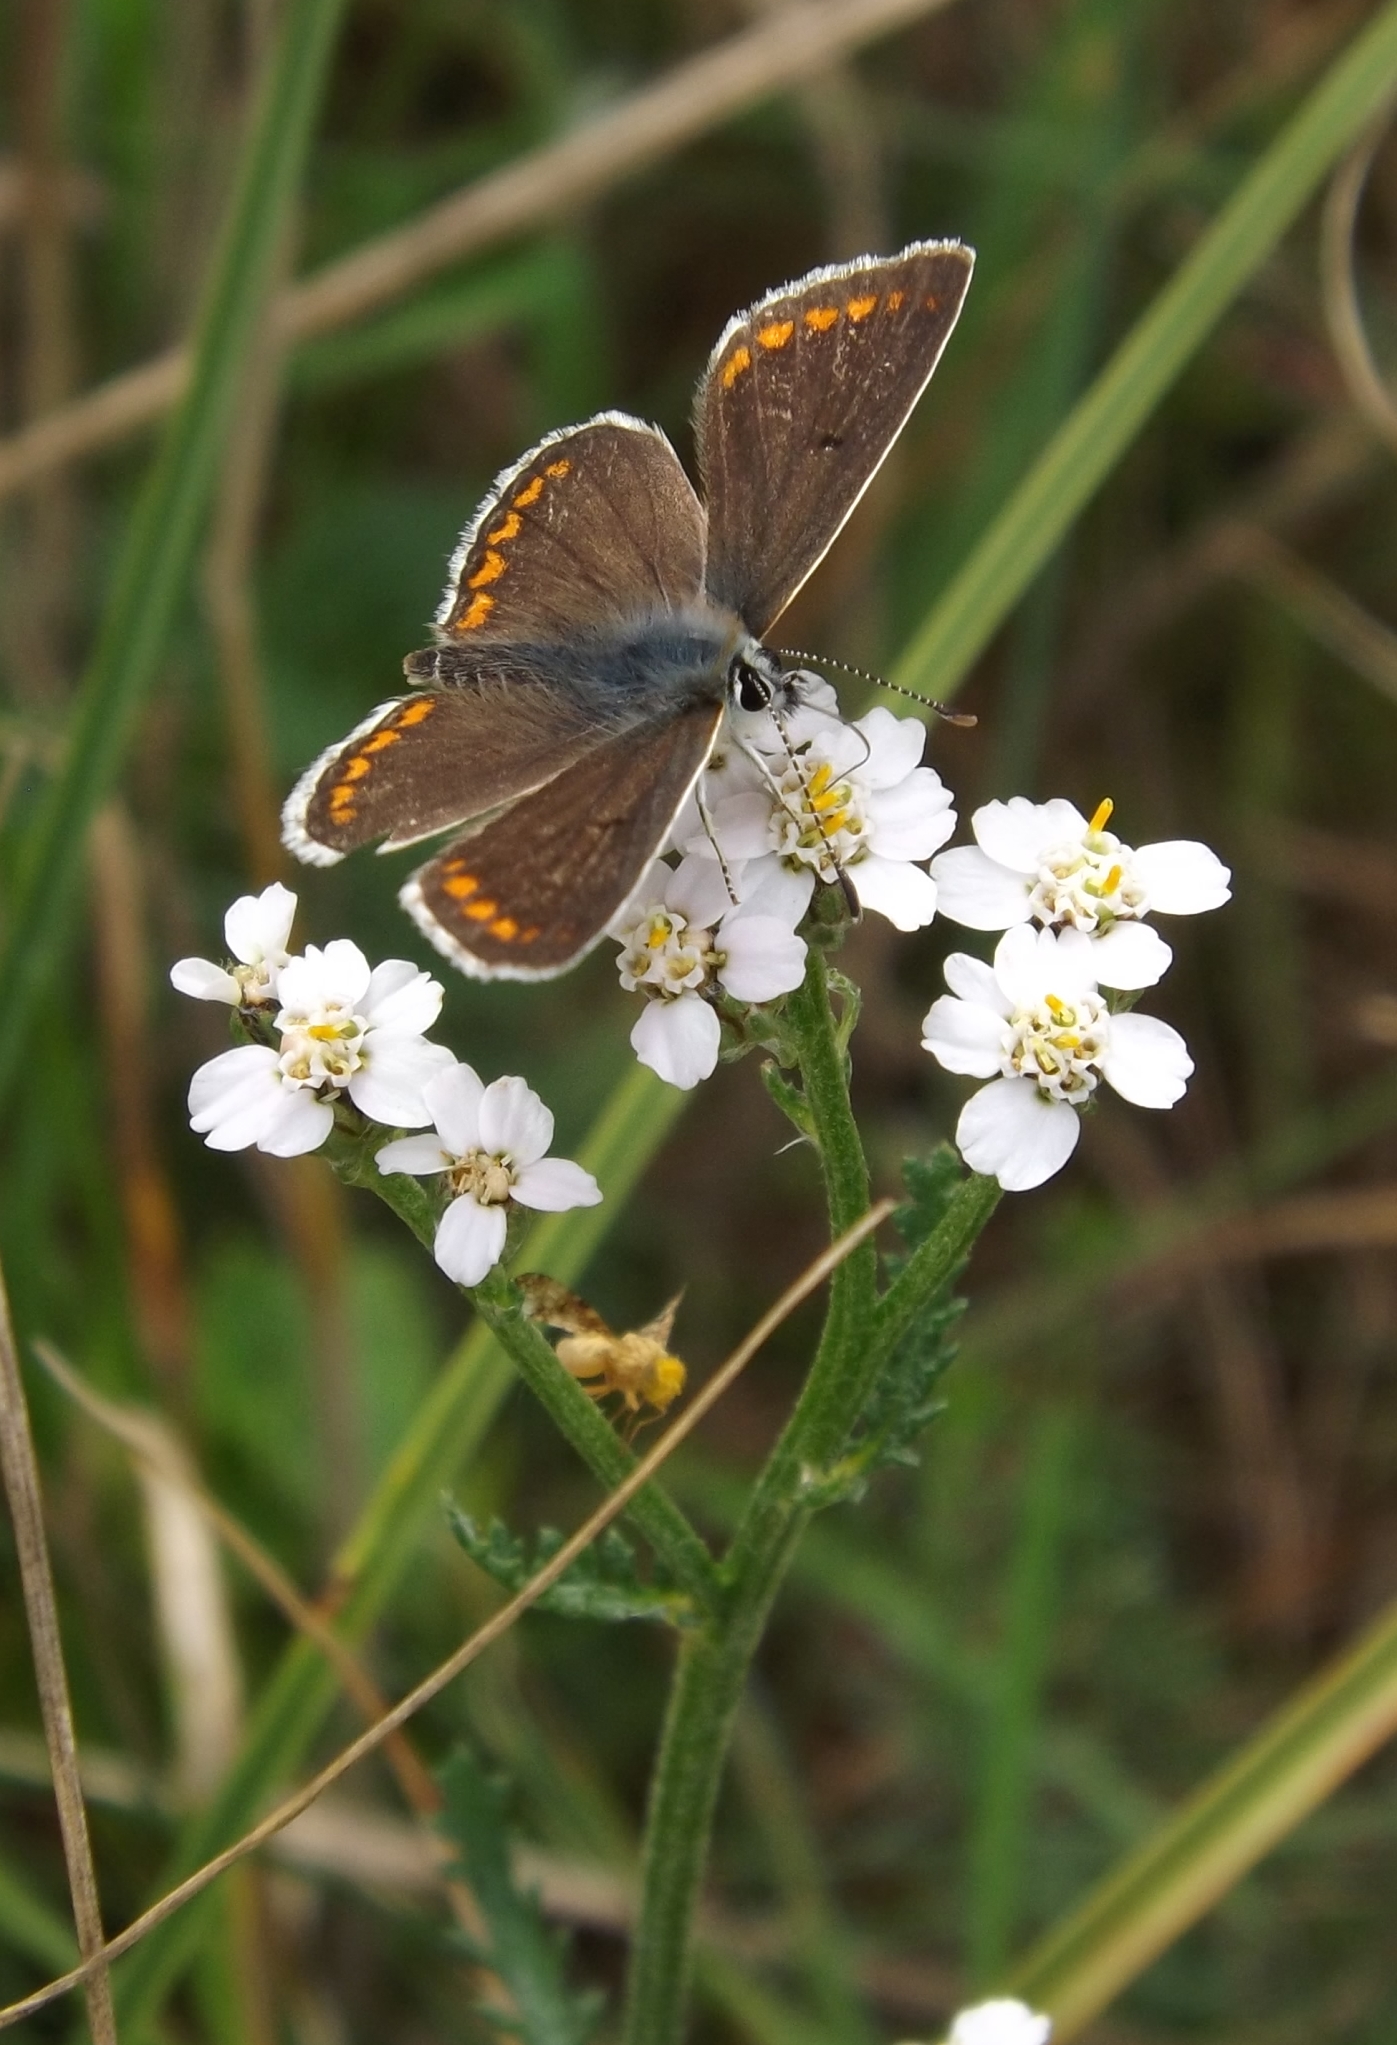 Brown Argus butterfly